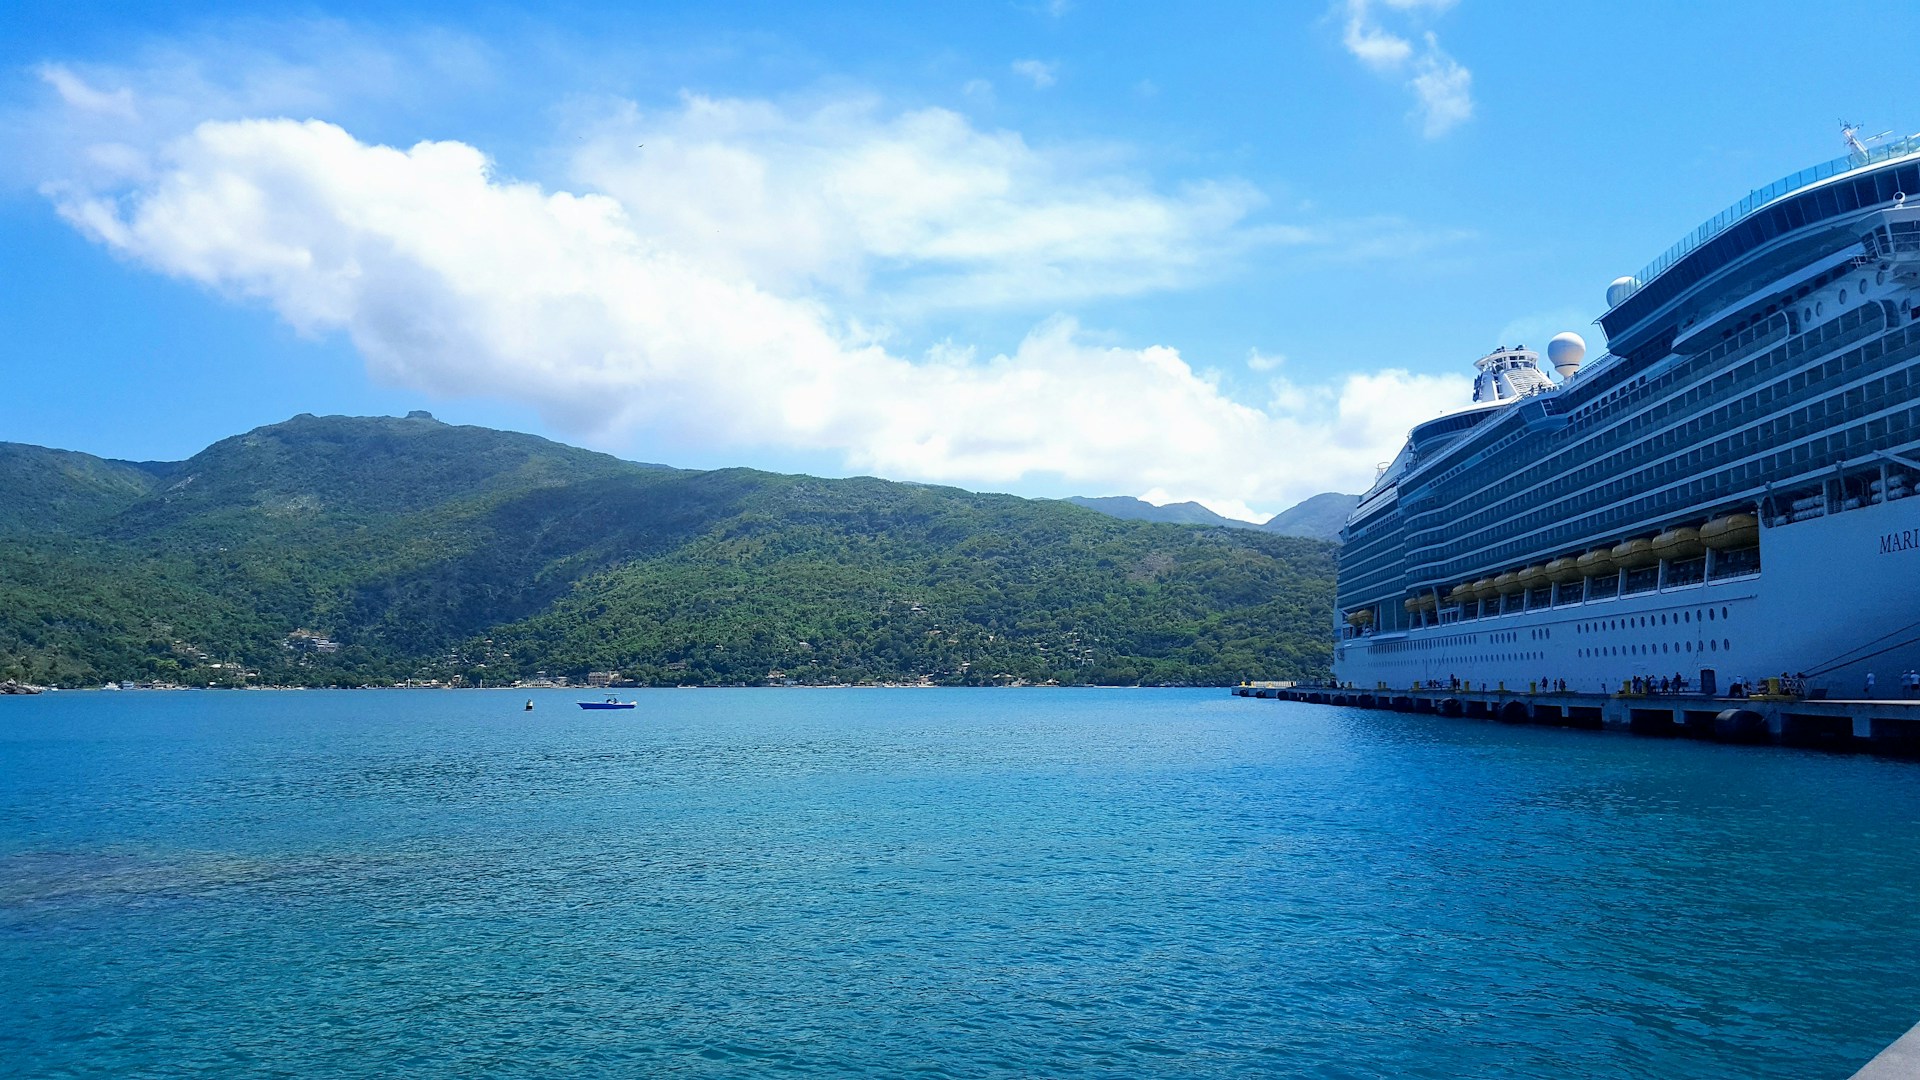 Cruise ship arriving at the port in Labadee, Haiti. Beautiful water and mountains in the background.